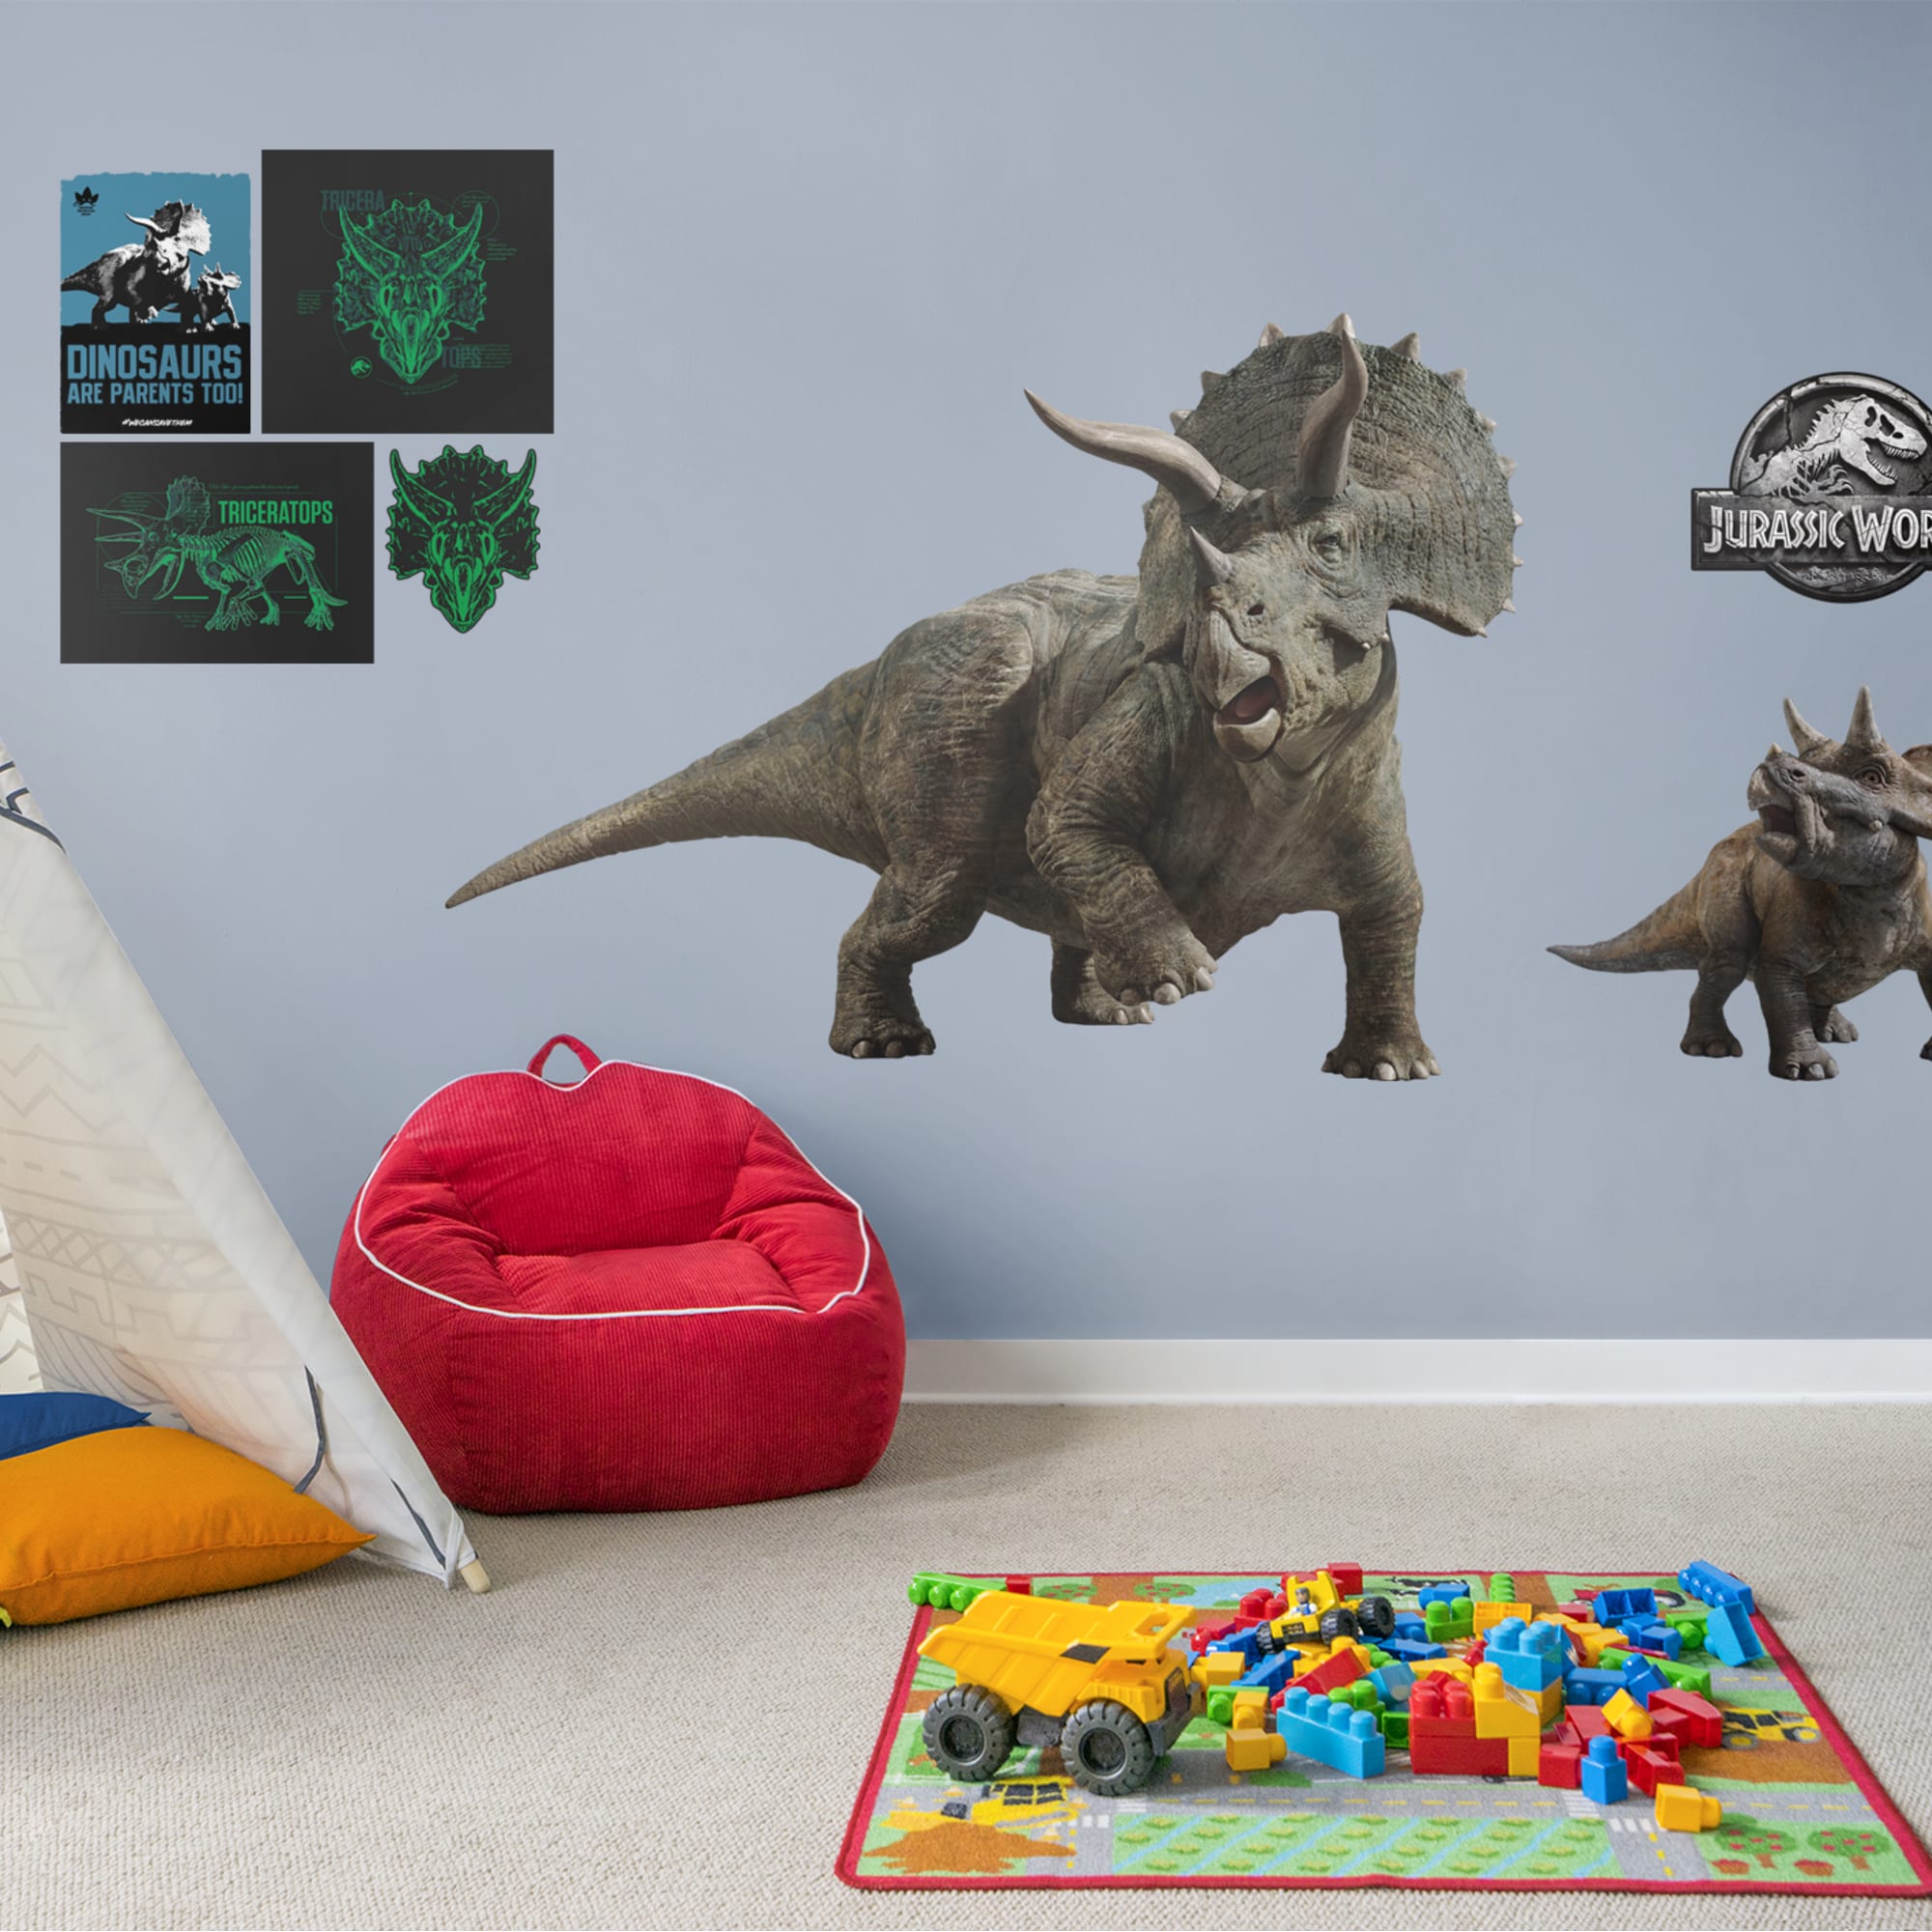 Triceratops - Jurassic World: Fallen Kingdom - Officially Licensed Removable Wall Decal Huge Character + 5 Decals (46"W x 42"H)